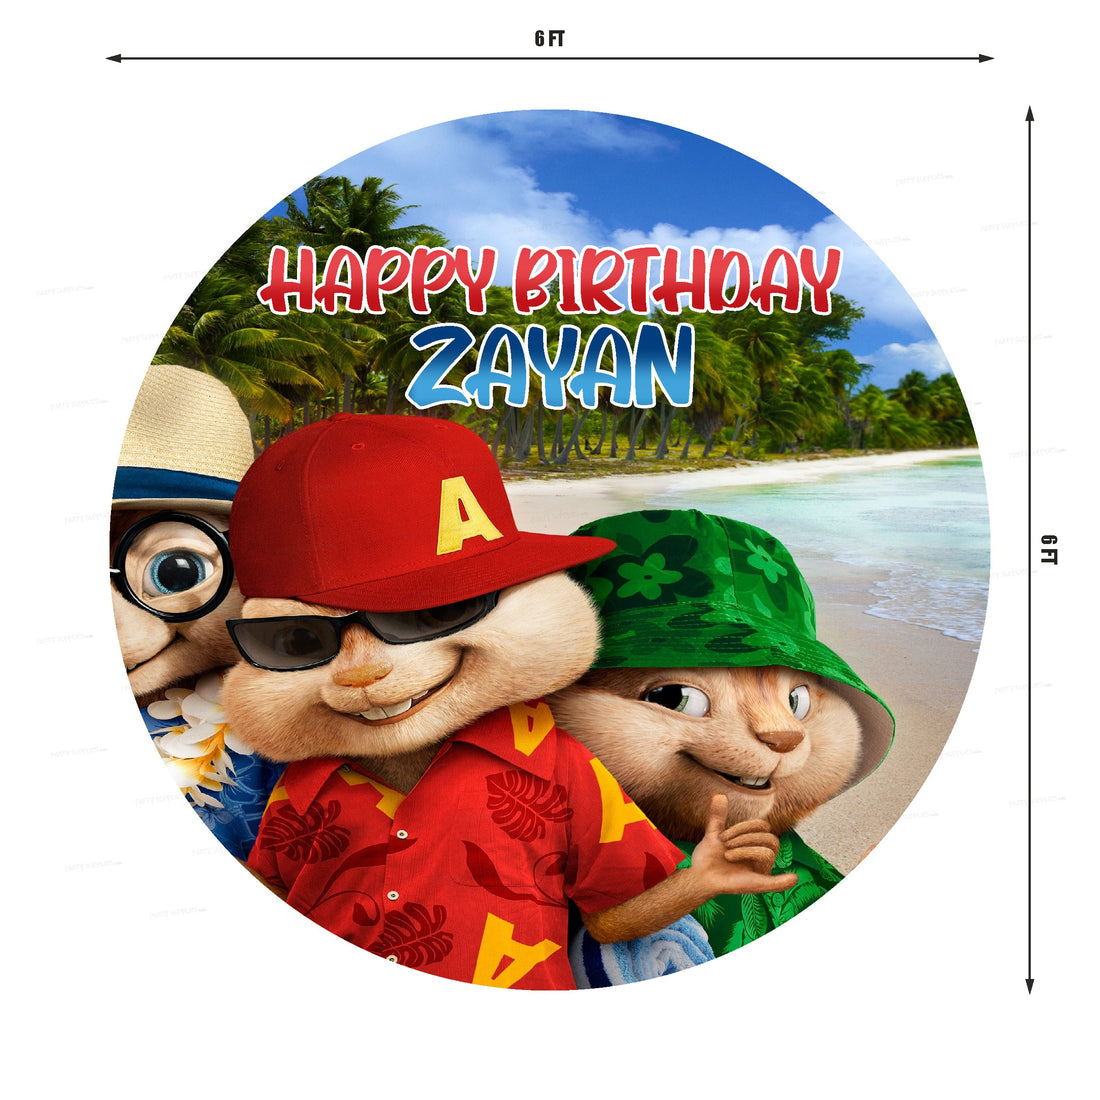 PSI Alvin and Chipmunks Theme Customized Round Backdrop